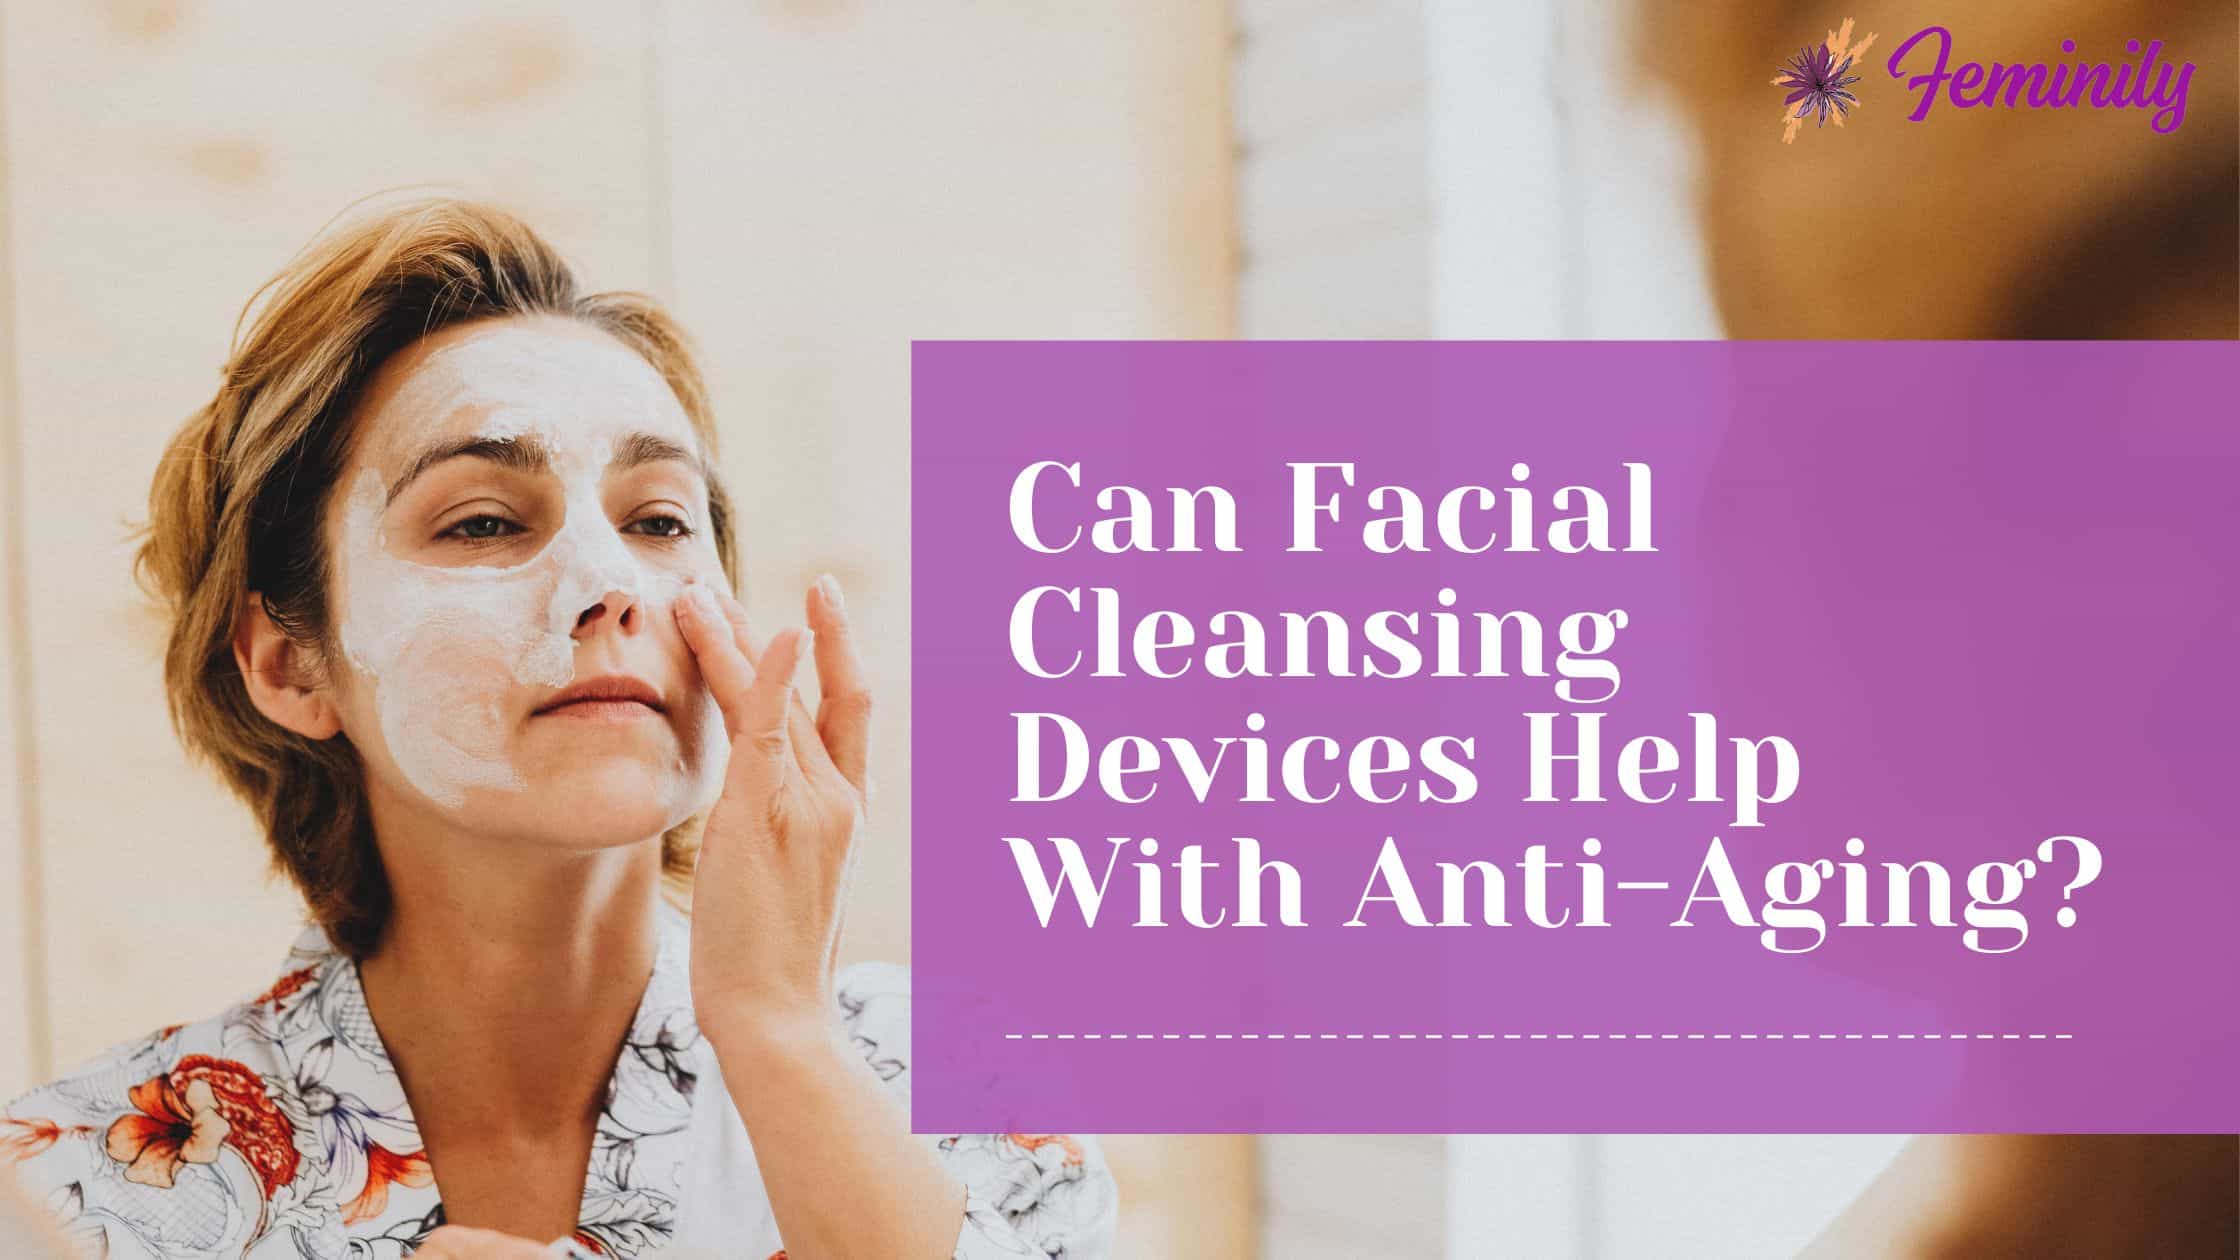 Can facial cleansing device help with anti-aging